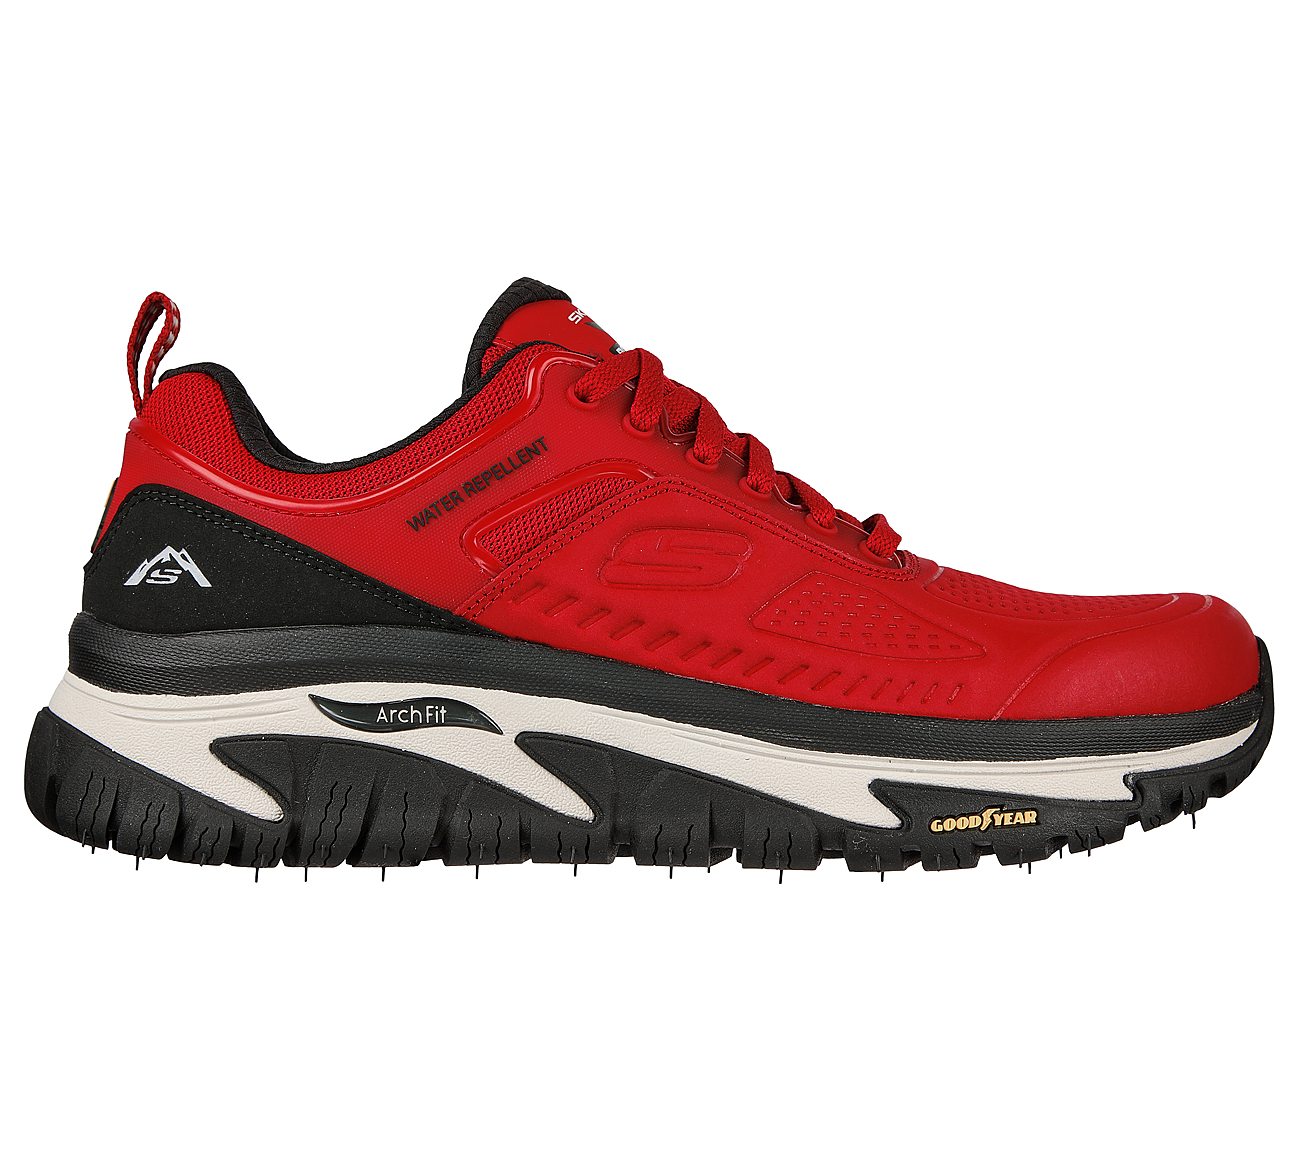 ARCH FIT ROAD WALKER, RED/BLACK Footwear Right View